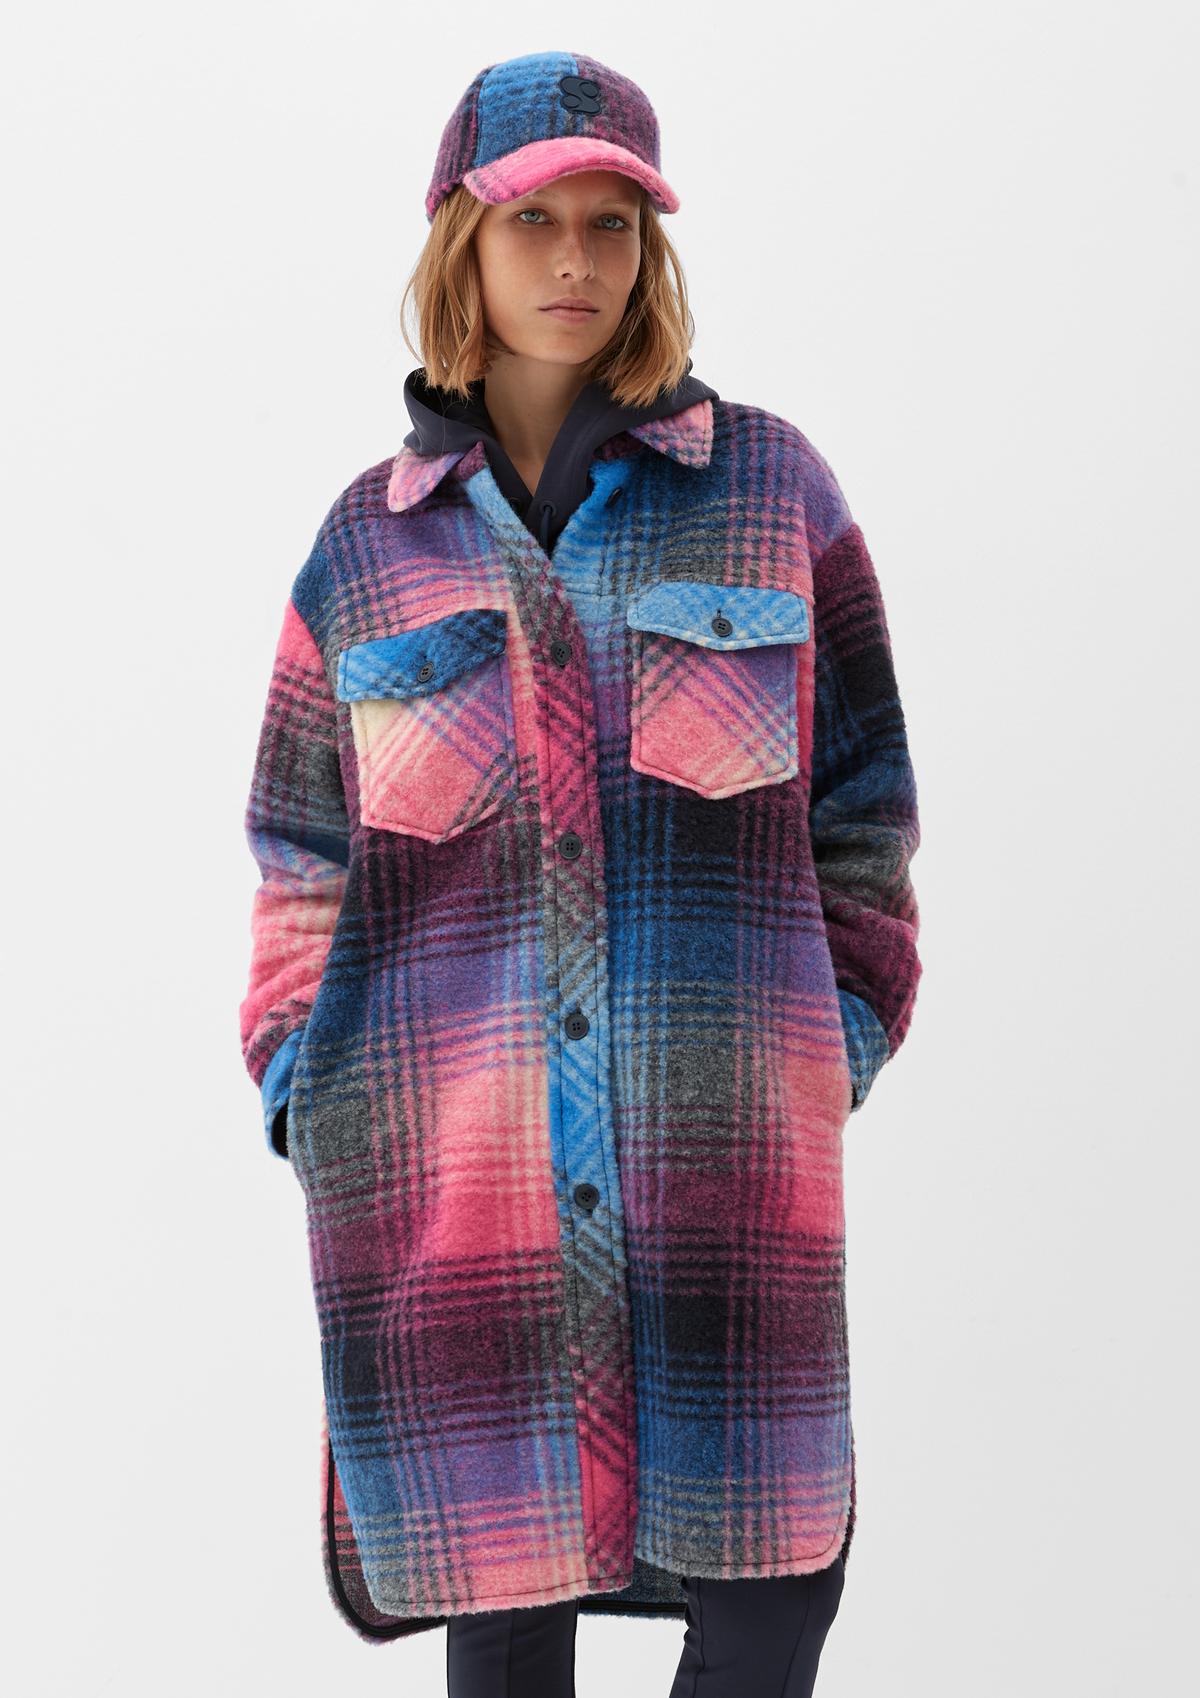 Long shirt jacket with a check pattern